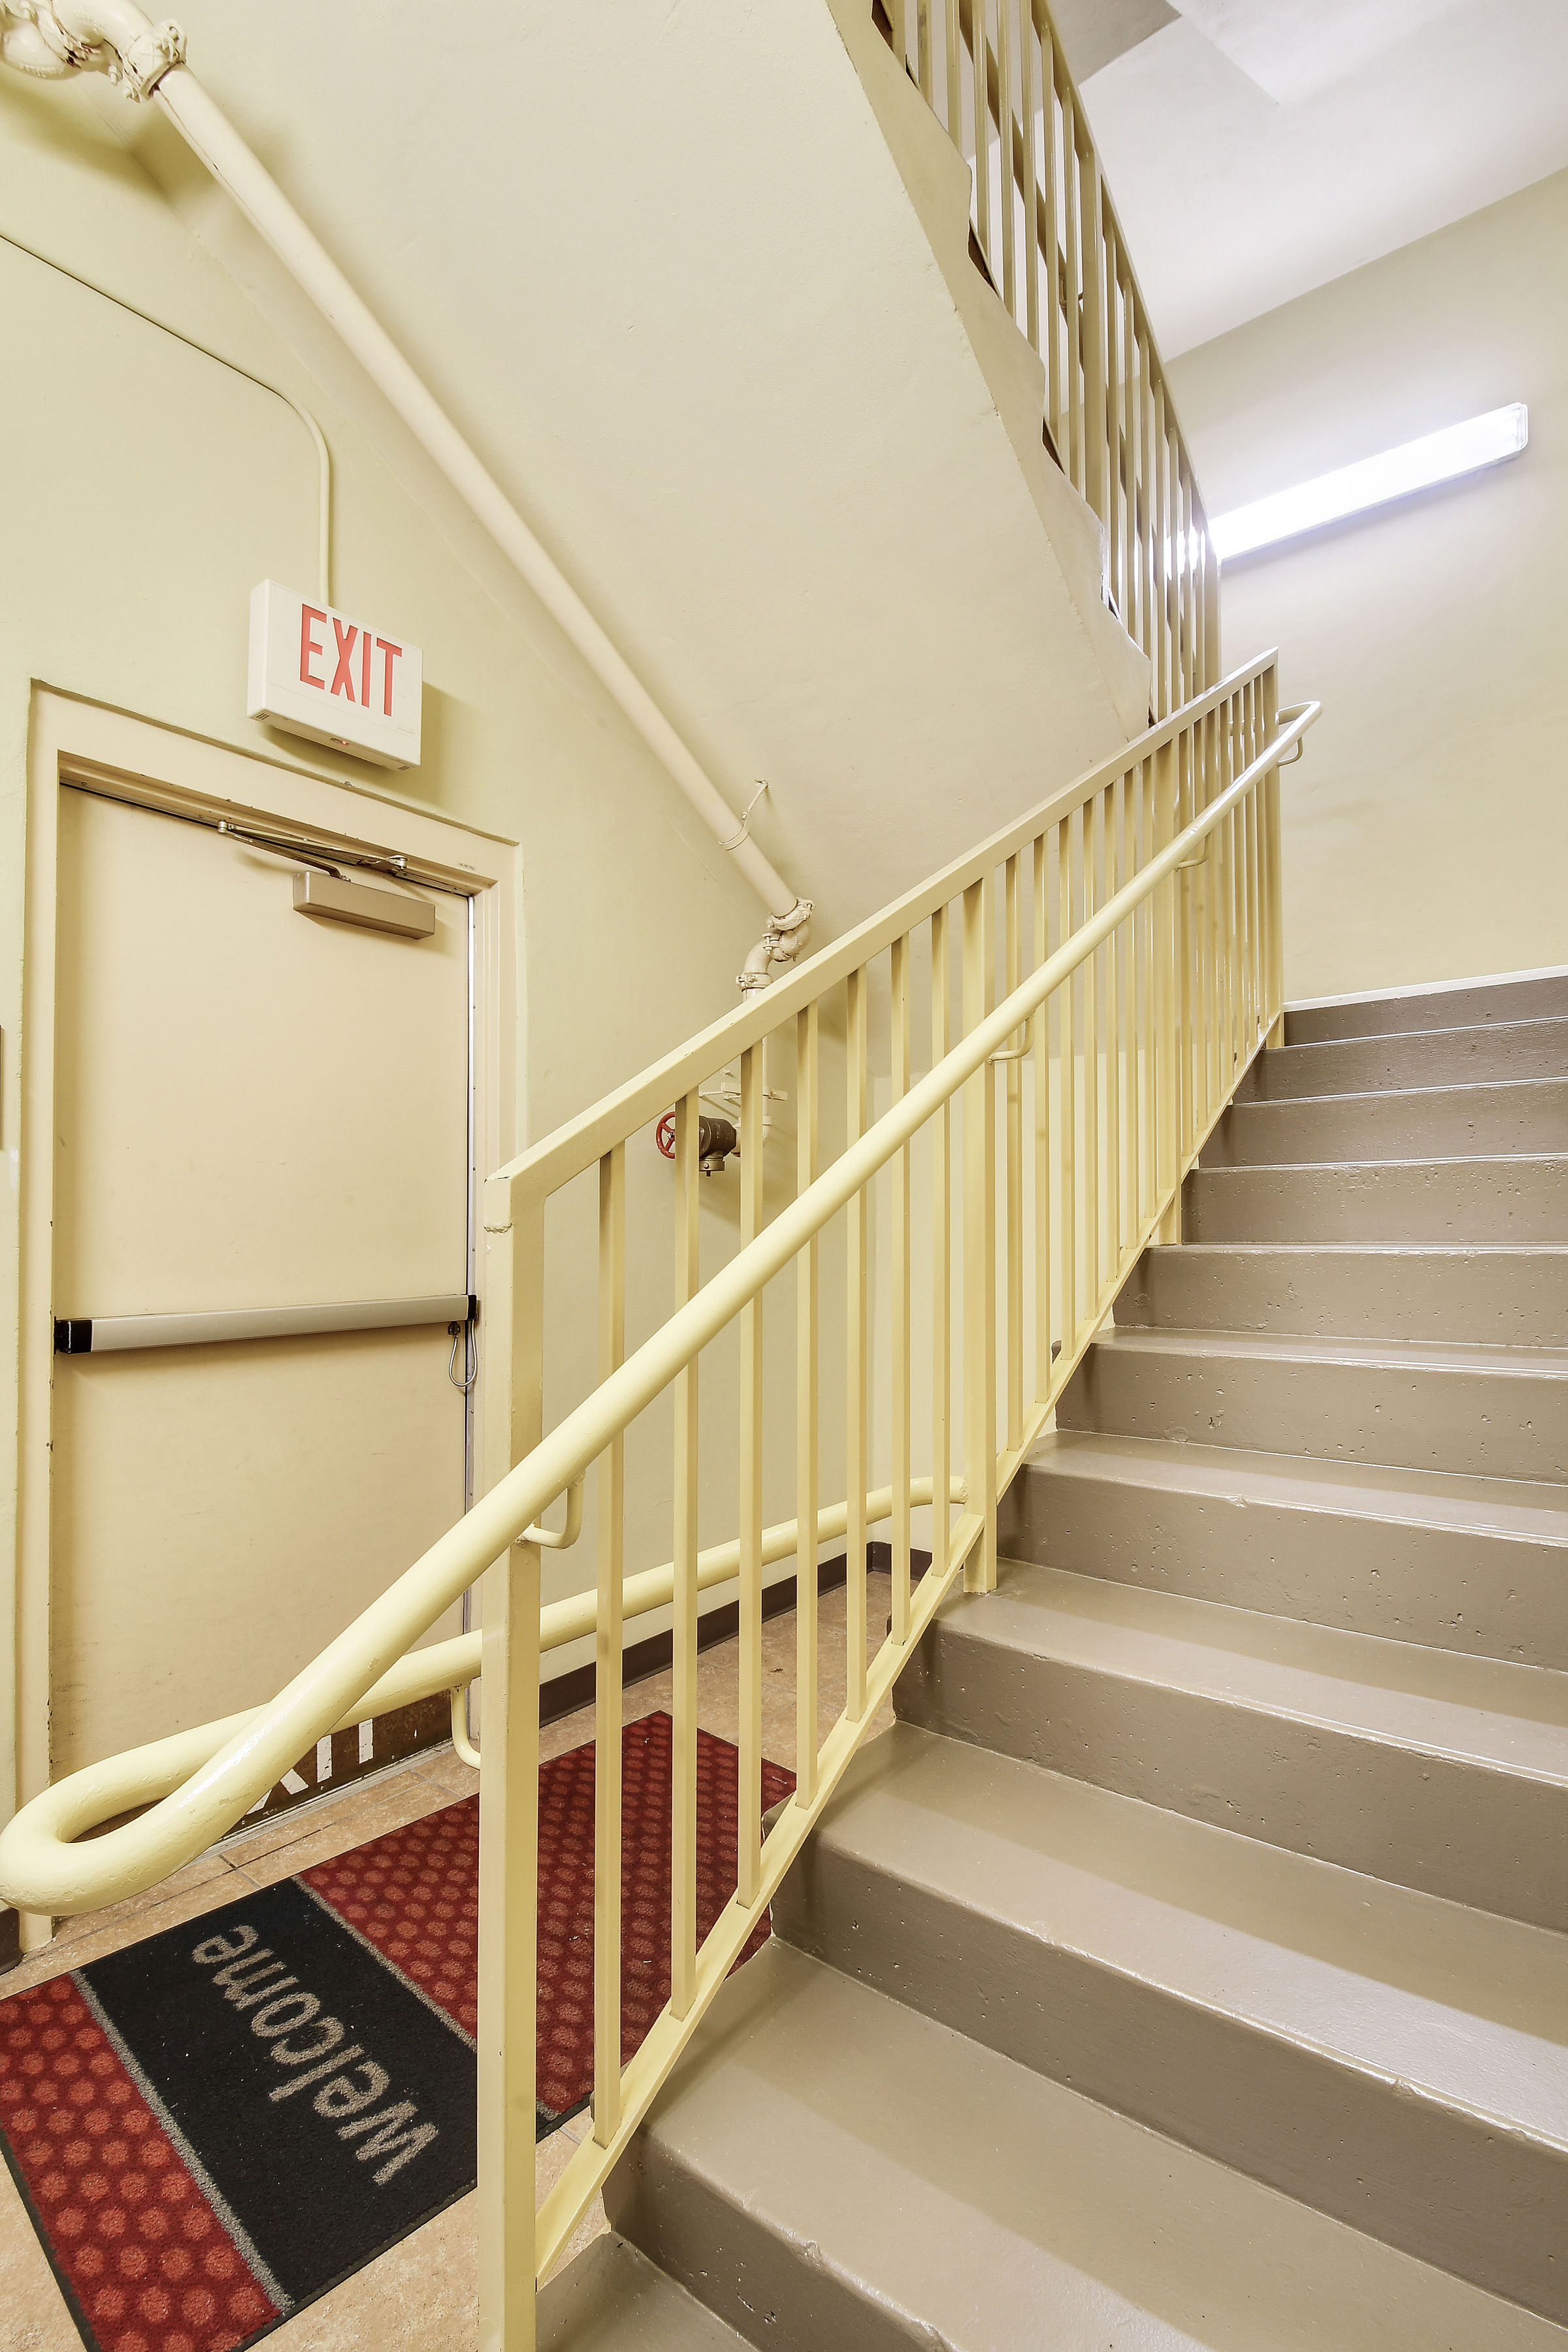 Walls, railings and stairs painted in this commercial stairwell by CertaPro Painters of Jupiter, FL